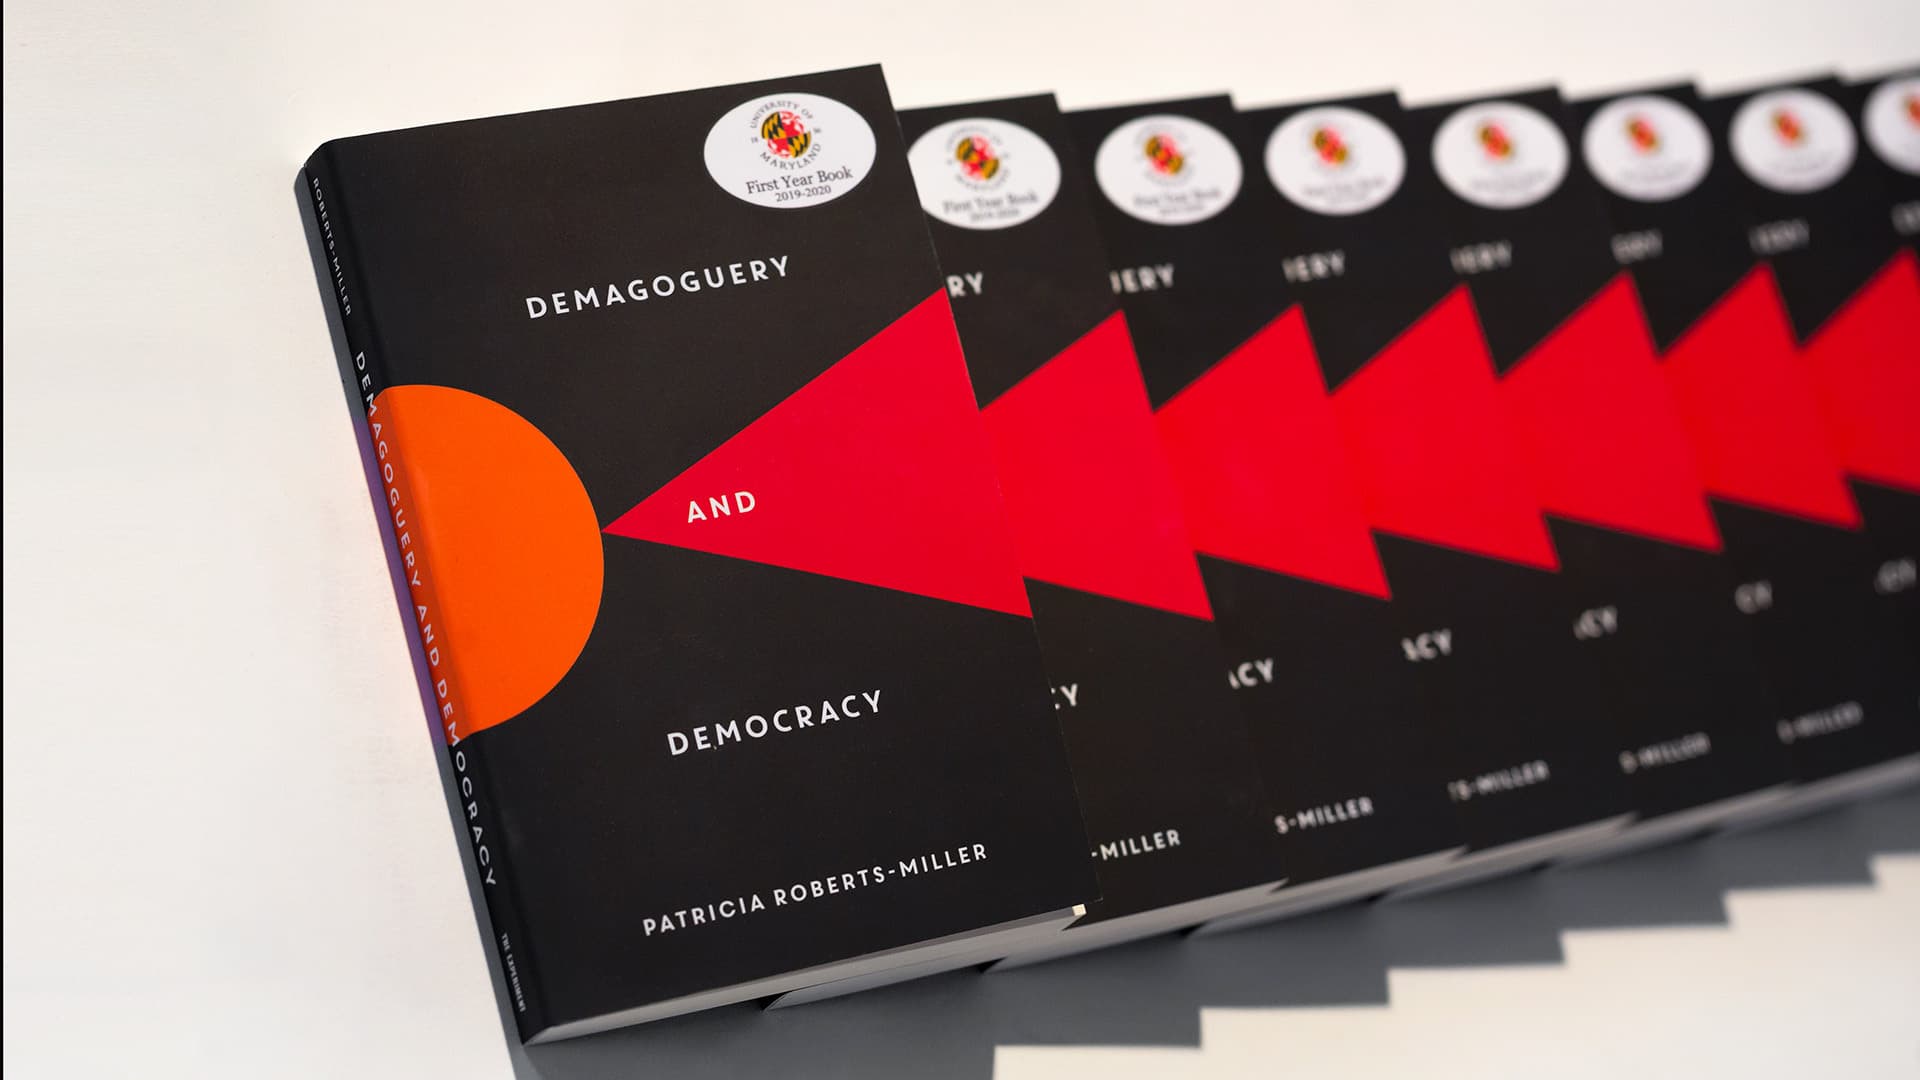 “Demagoguery and Democracy” books